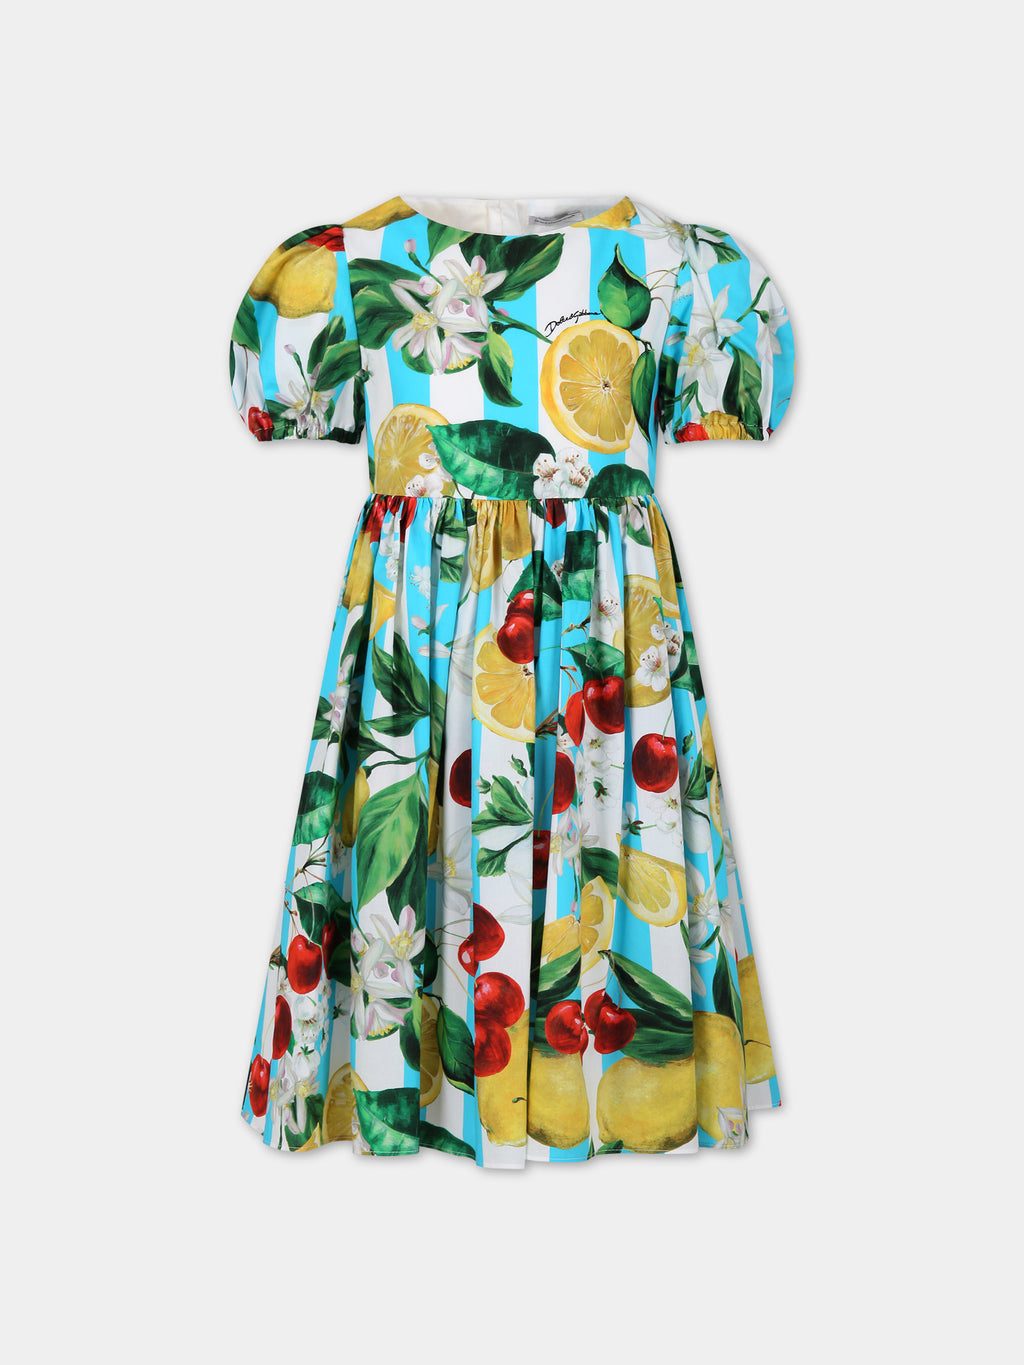 Multicolor dress for girl with all-over flowers and fruits